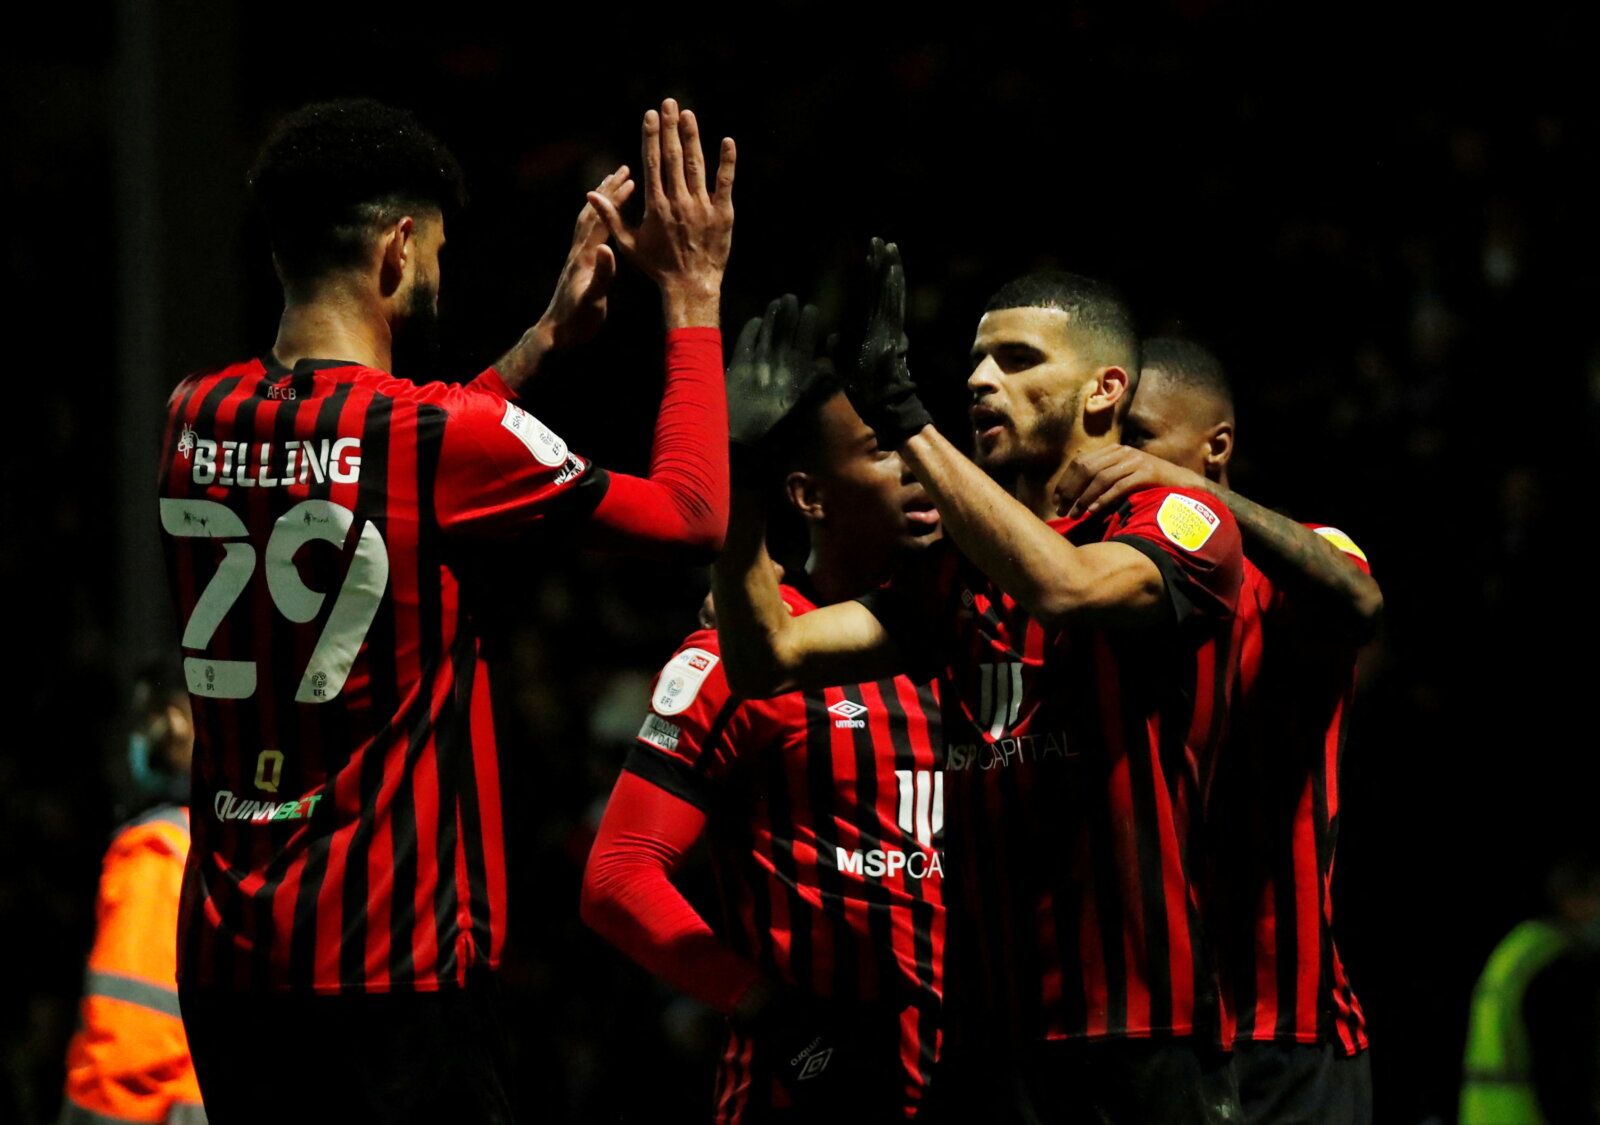 Soccer Football - Championship - Queens Park Rangers v AFC Bournemouth - Loftus Road, London, Britain - December 27, 2021 AFC Bournemouth's Dominic Solanke celebrates with Philip Billing after the match  Action Images/Andrew Boyers  EDITORIAL USE ONLY. No use with unauthorized audio, video, data, fixture lists, club/league logos or 